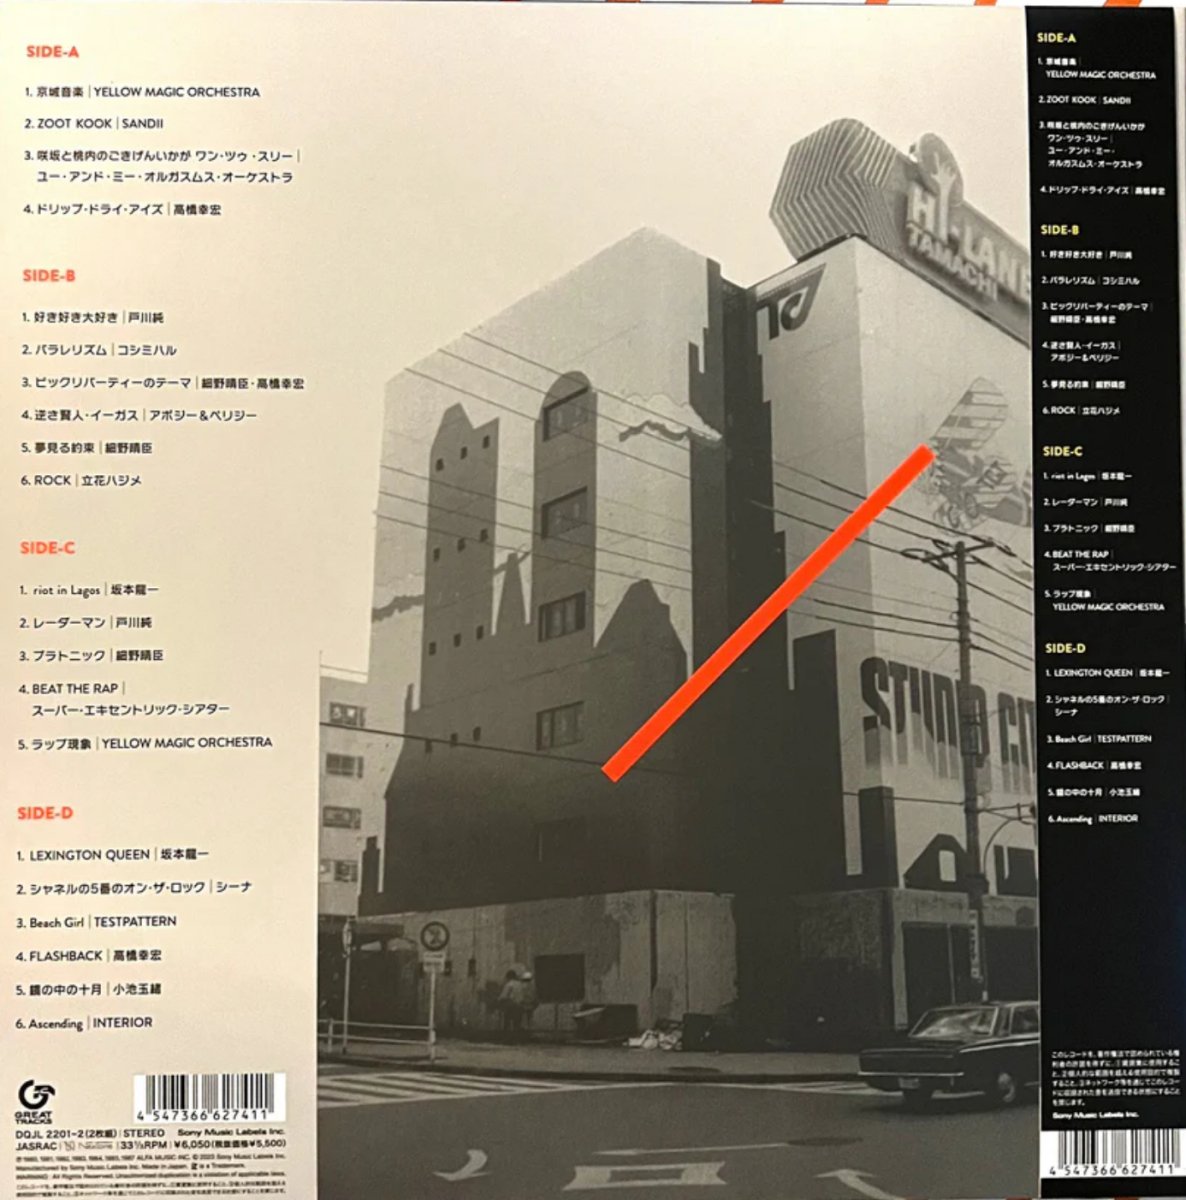 VARIOUS ARTISTS - ALFA/YEN Records 1980 to 1987: Techno Pop and Other Electronic Adventures in Tokyo - Inner Ocean Records